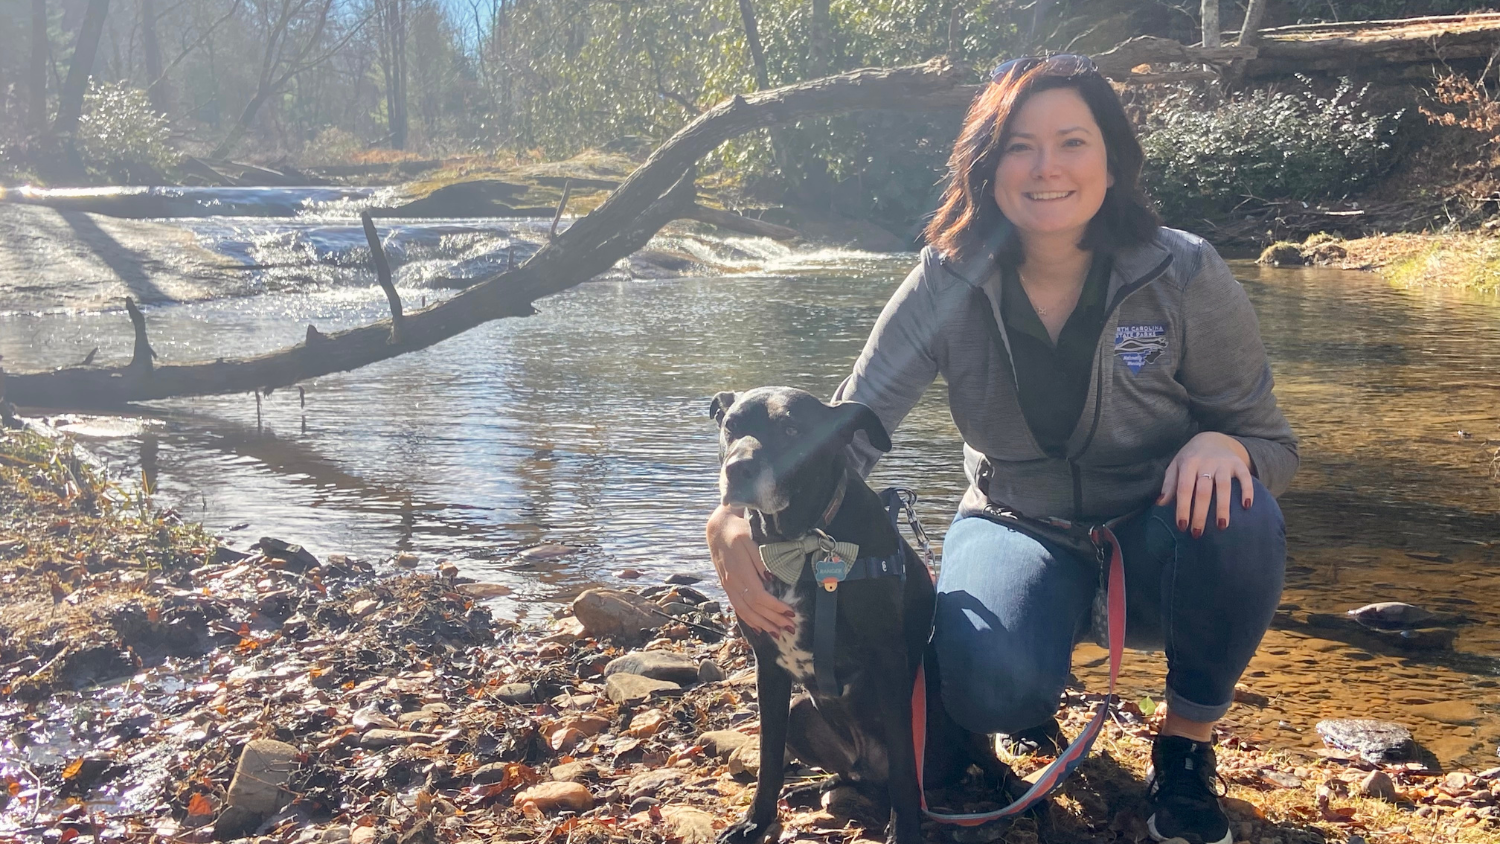 Kat stoops by creek with her dog - Graduation to Vocation: Kat Deutsch is Developing State Park Trails - College of Natural Resources News NC State University